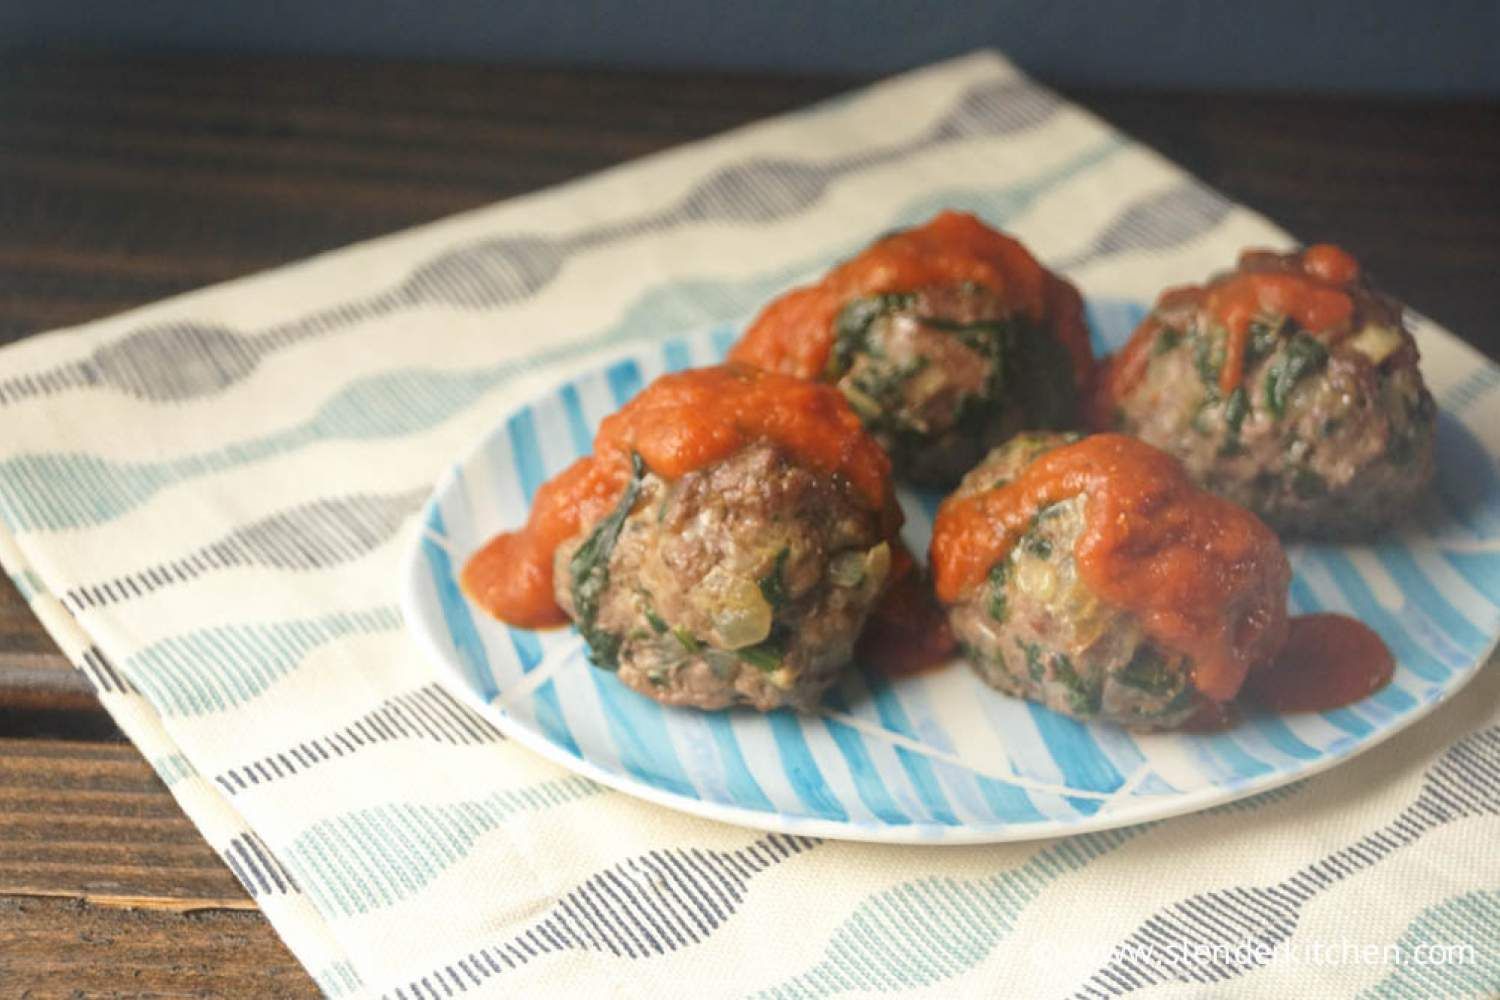 Spinach meatballs with marinara sauce on a plate.